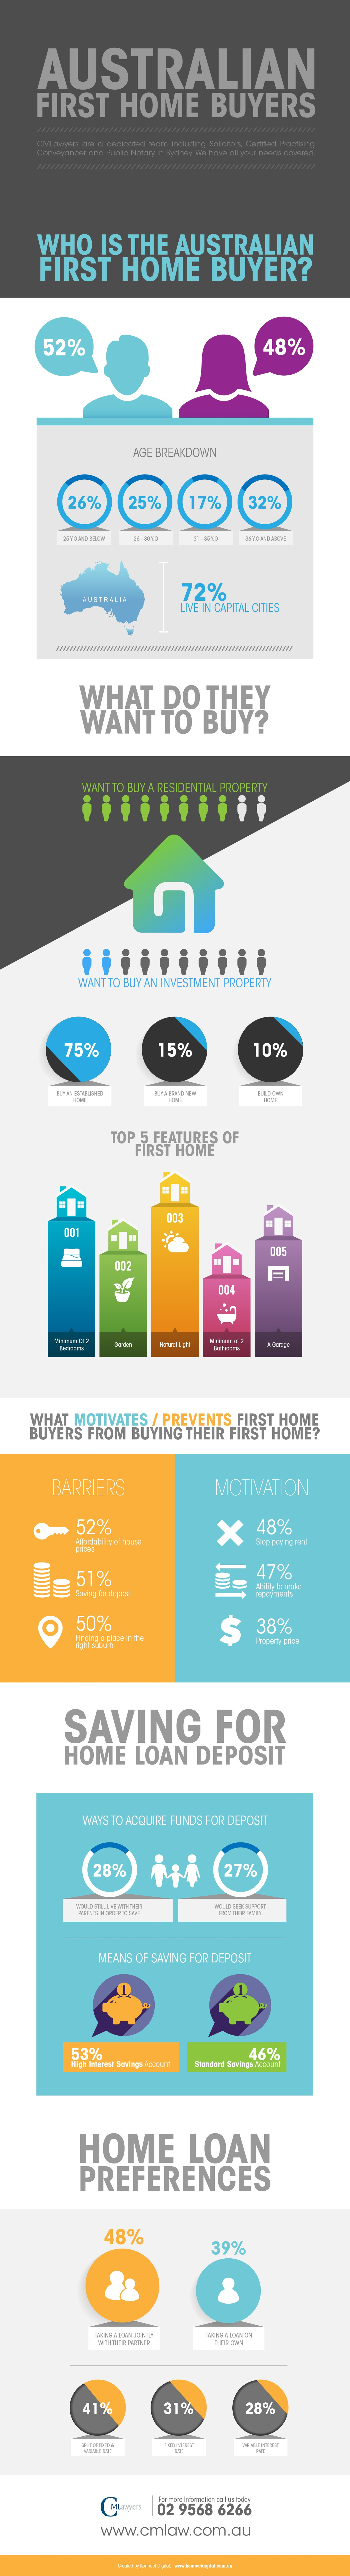 Australian First Home Buyers Infographic